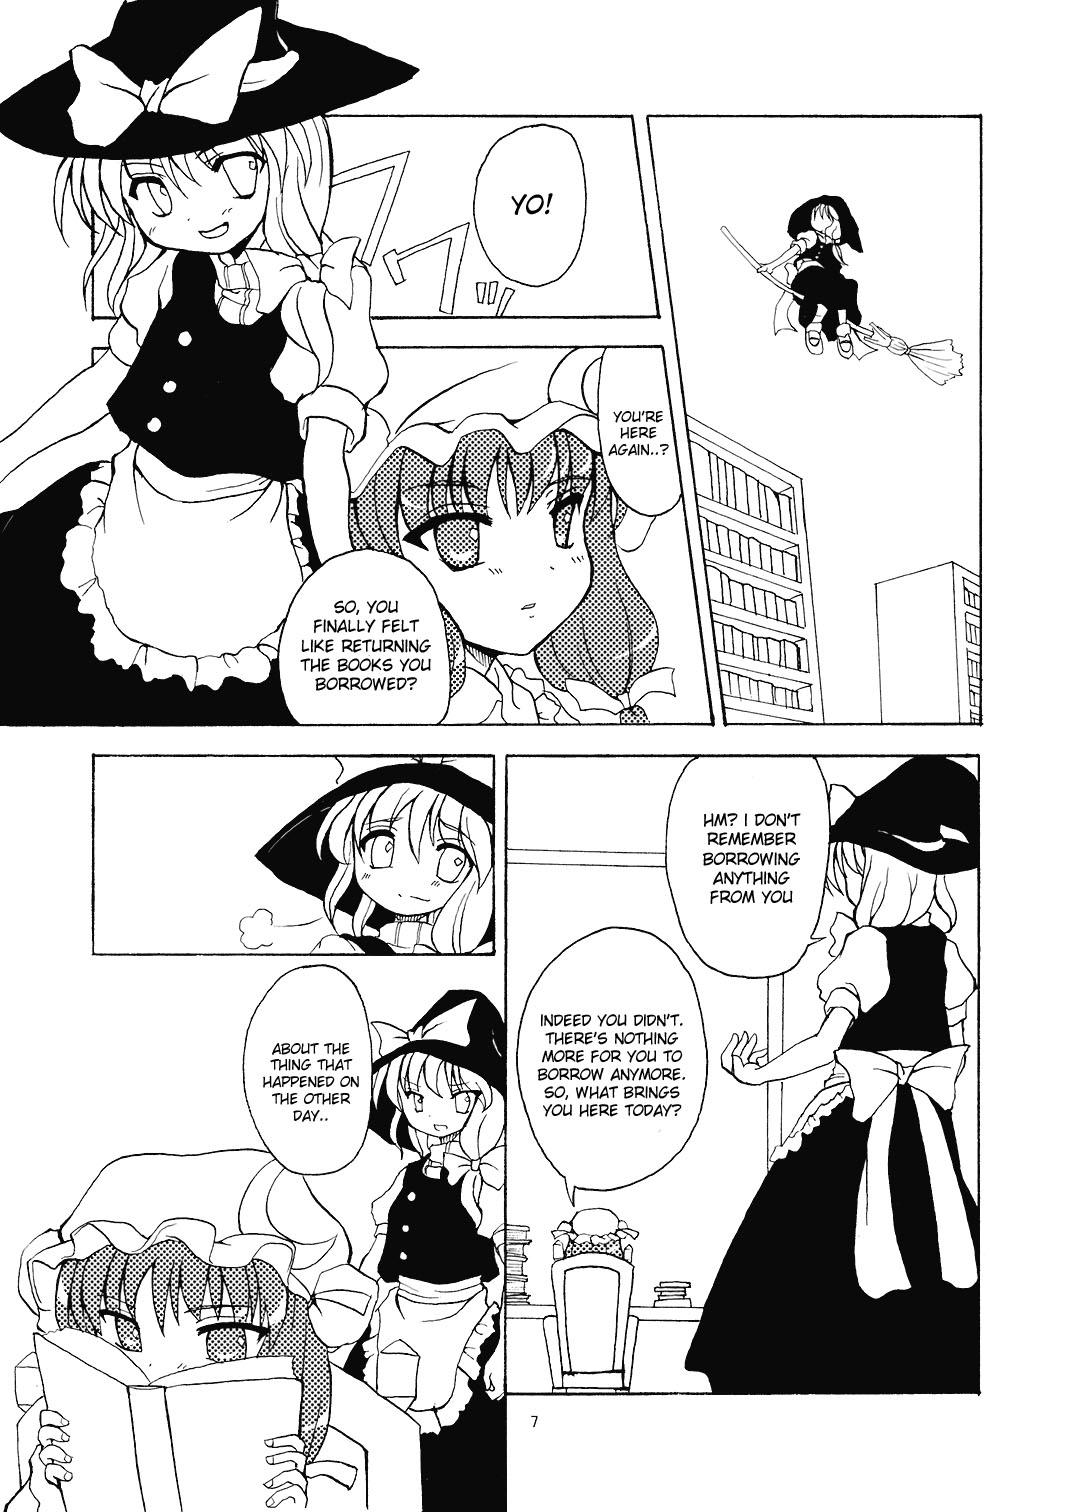 Interview Alice in Scarlet Mansion 2 - Touhou project Vaginal - Page 7